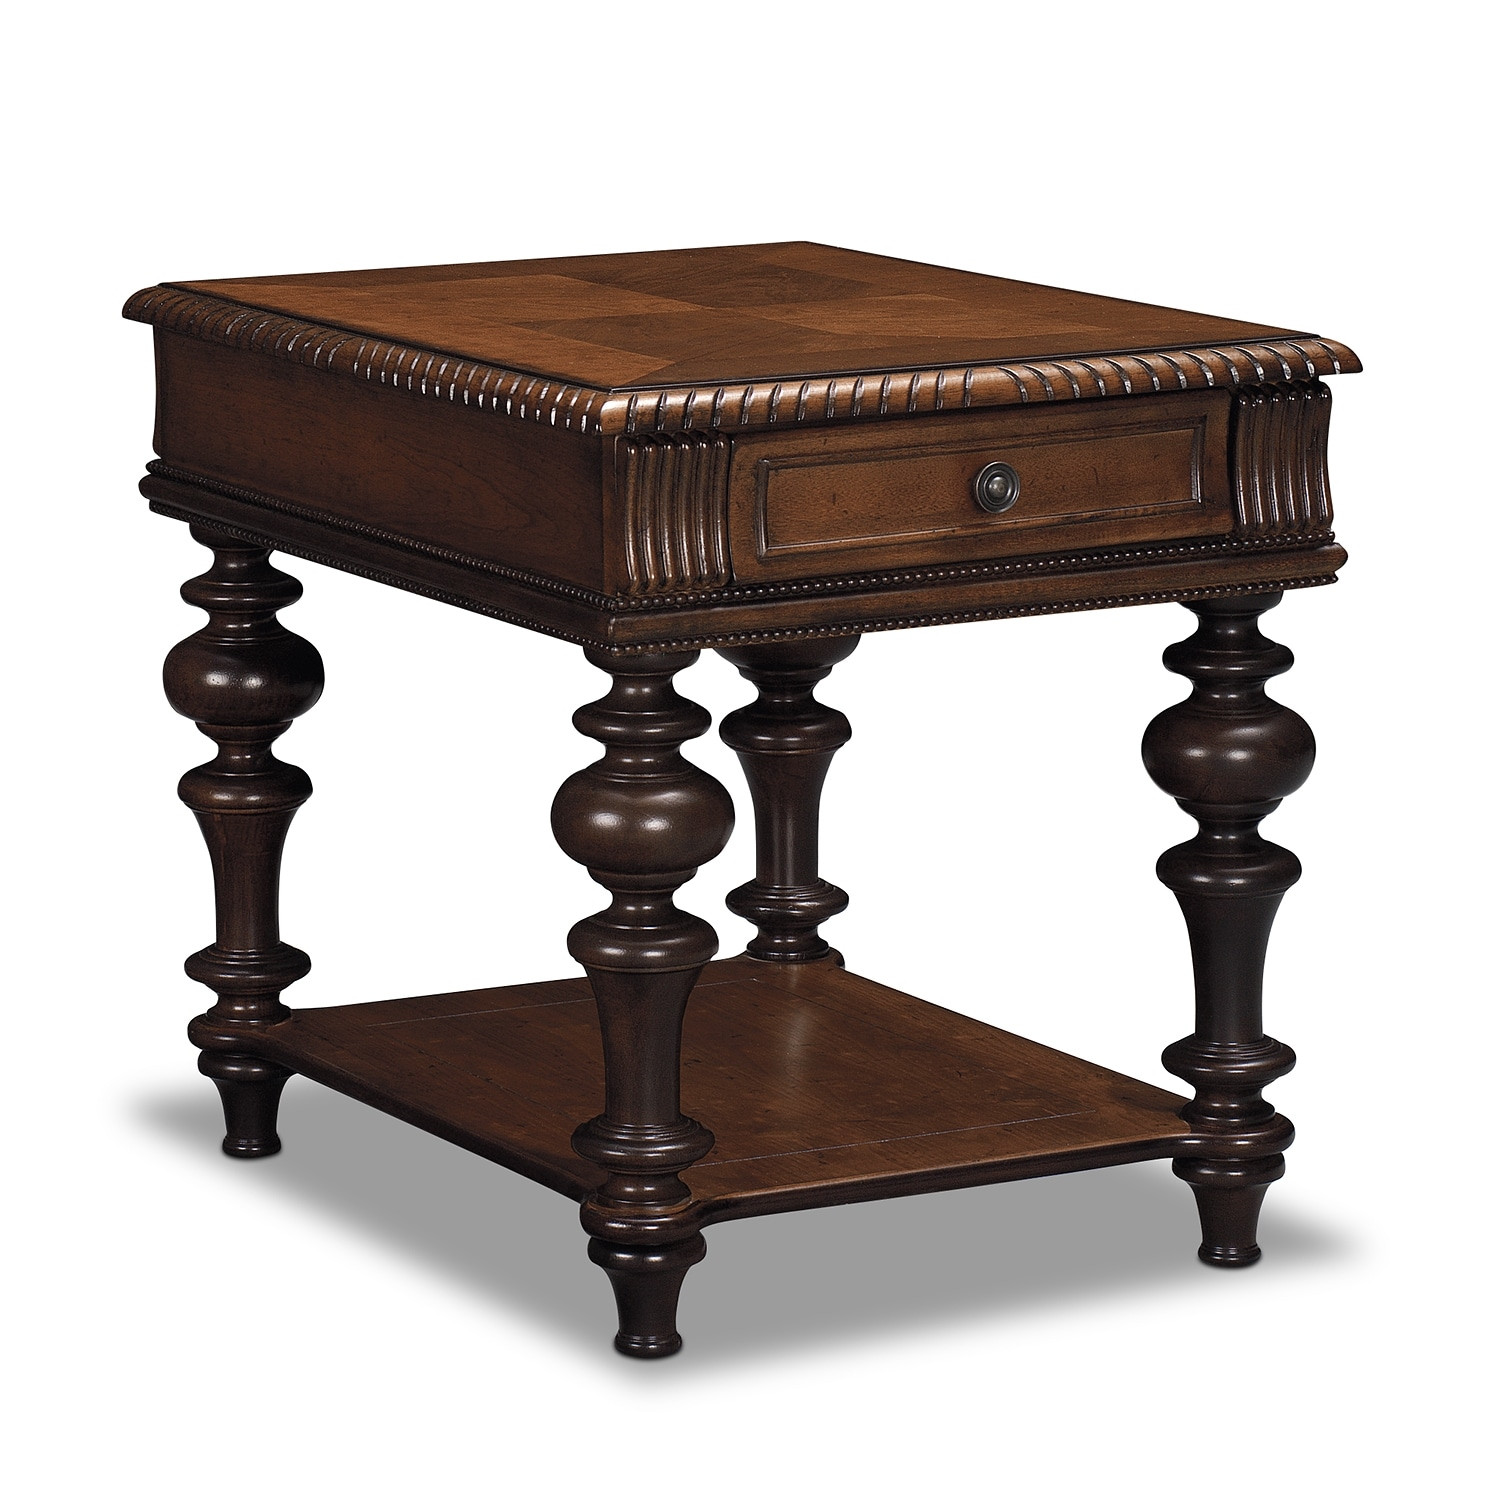 Value City Living Room Tables
 Westham End Table Cherry